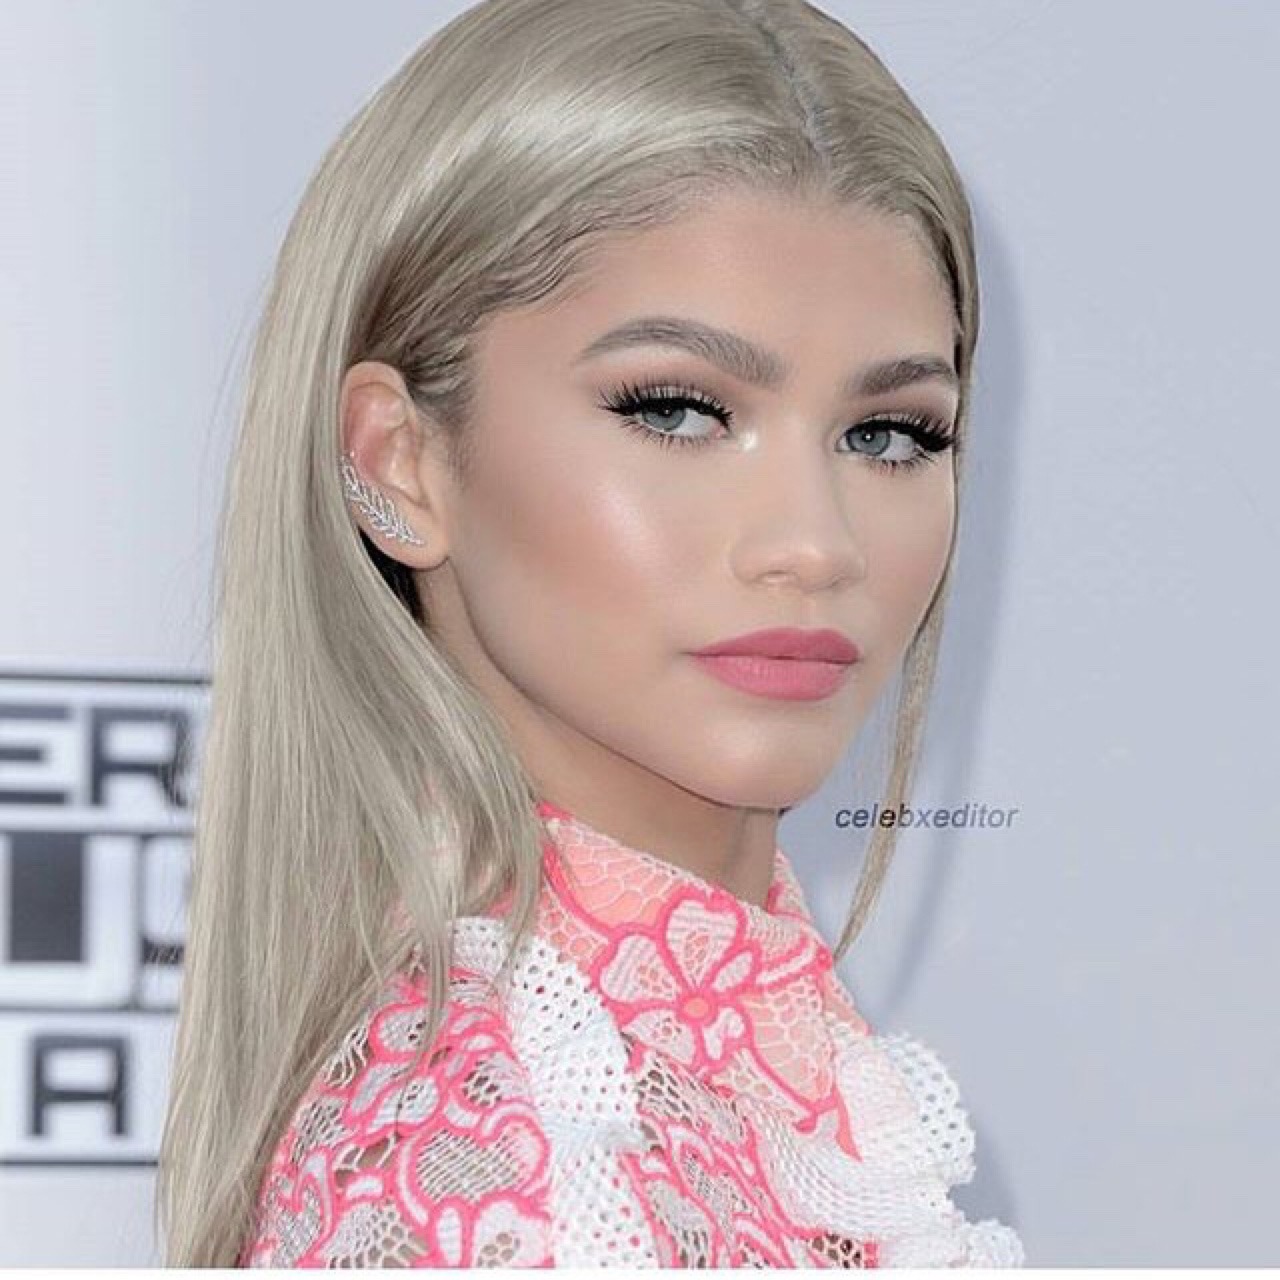 Skylar White Zendaya Is That What They Were Going For